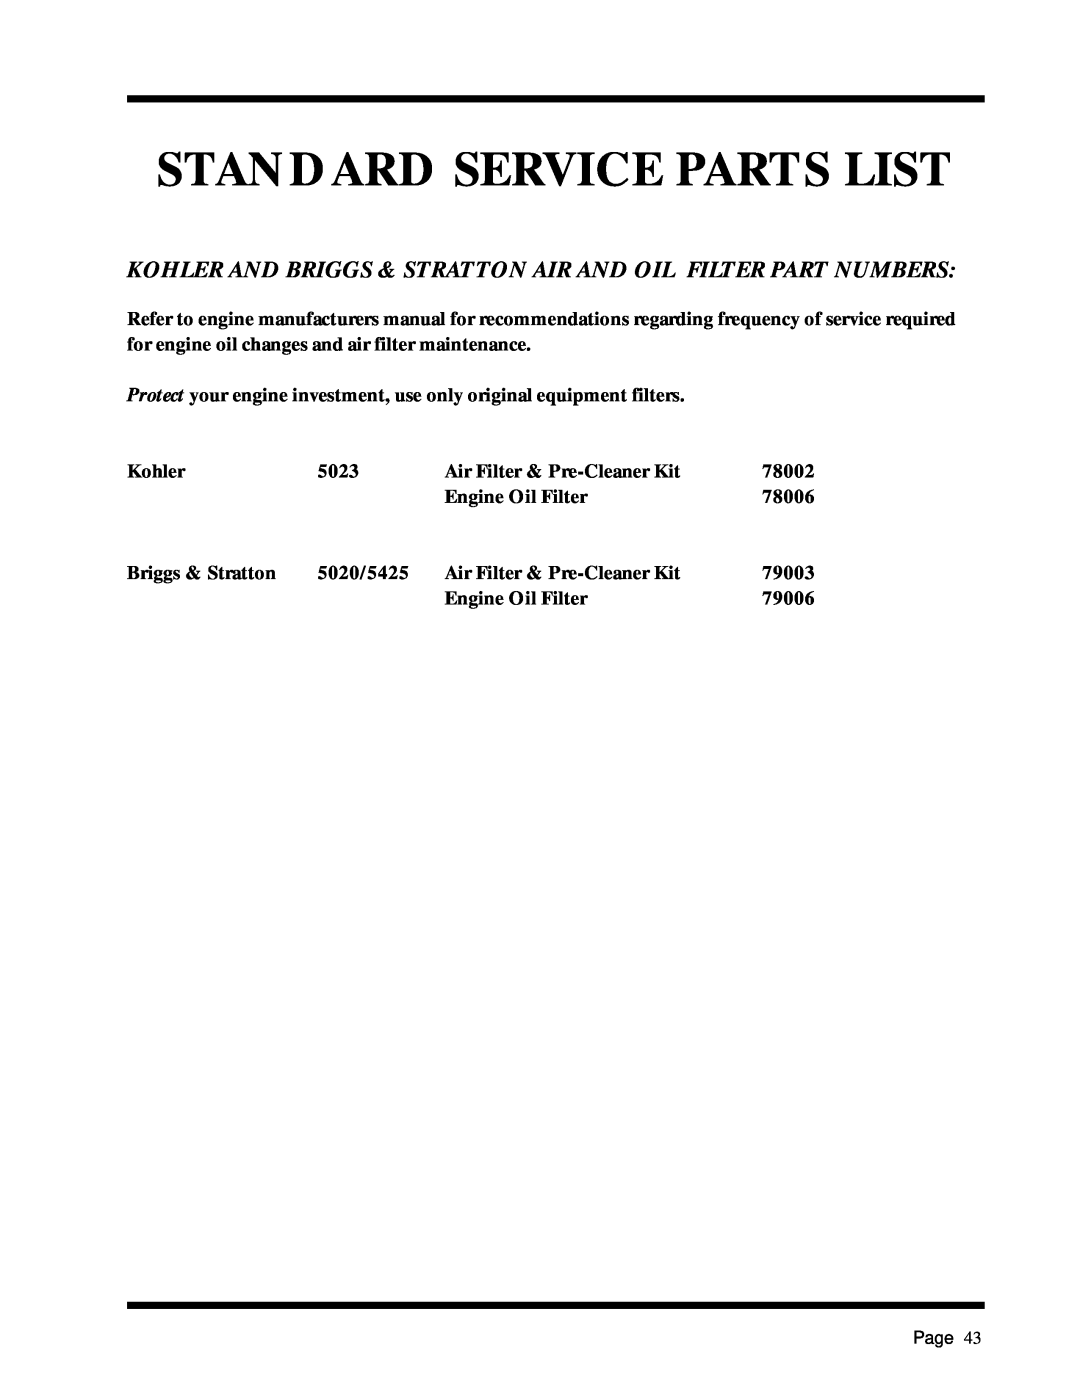 Dixon ZTR 5017Twin manual Kohler And Briggs & Stratton Air And Oil Filter Part Numbers, Standard Service Parts List 